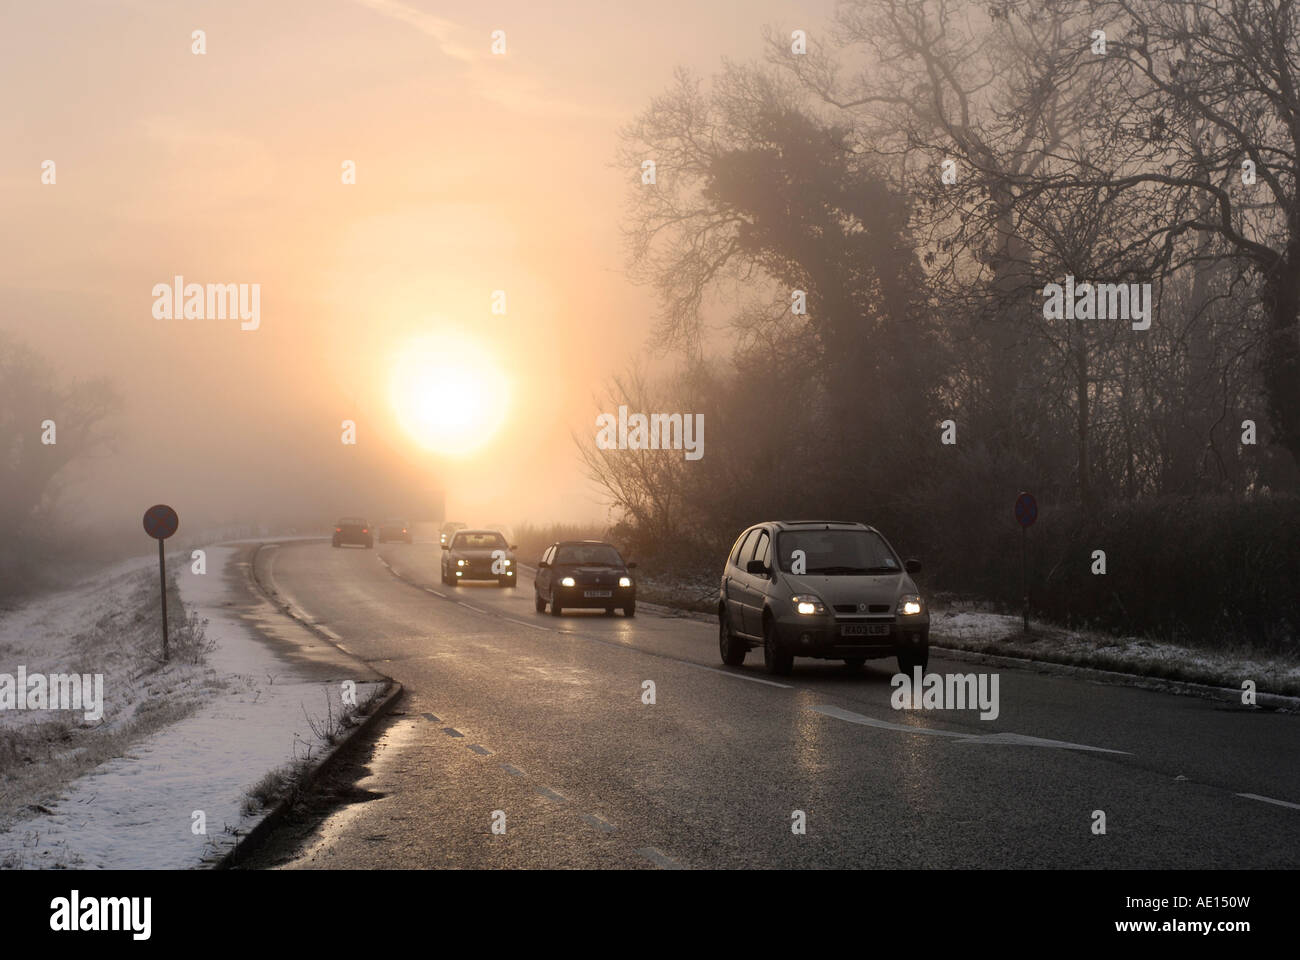 Cars being driven in foggy conditions on a road in the uk Stock Photo